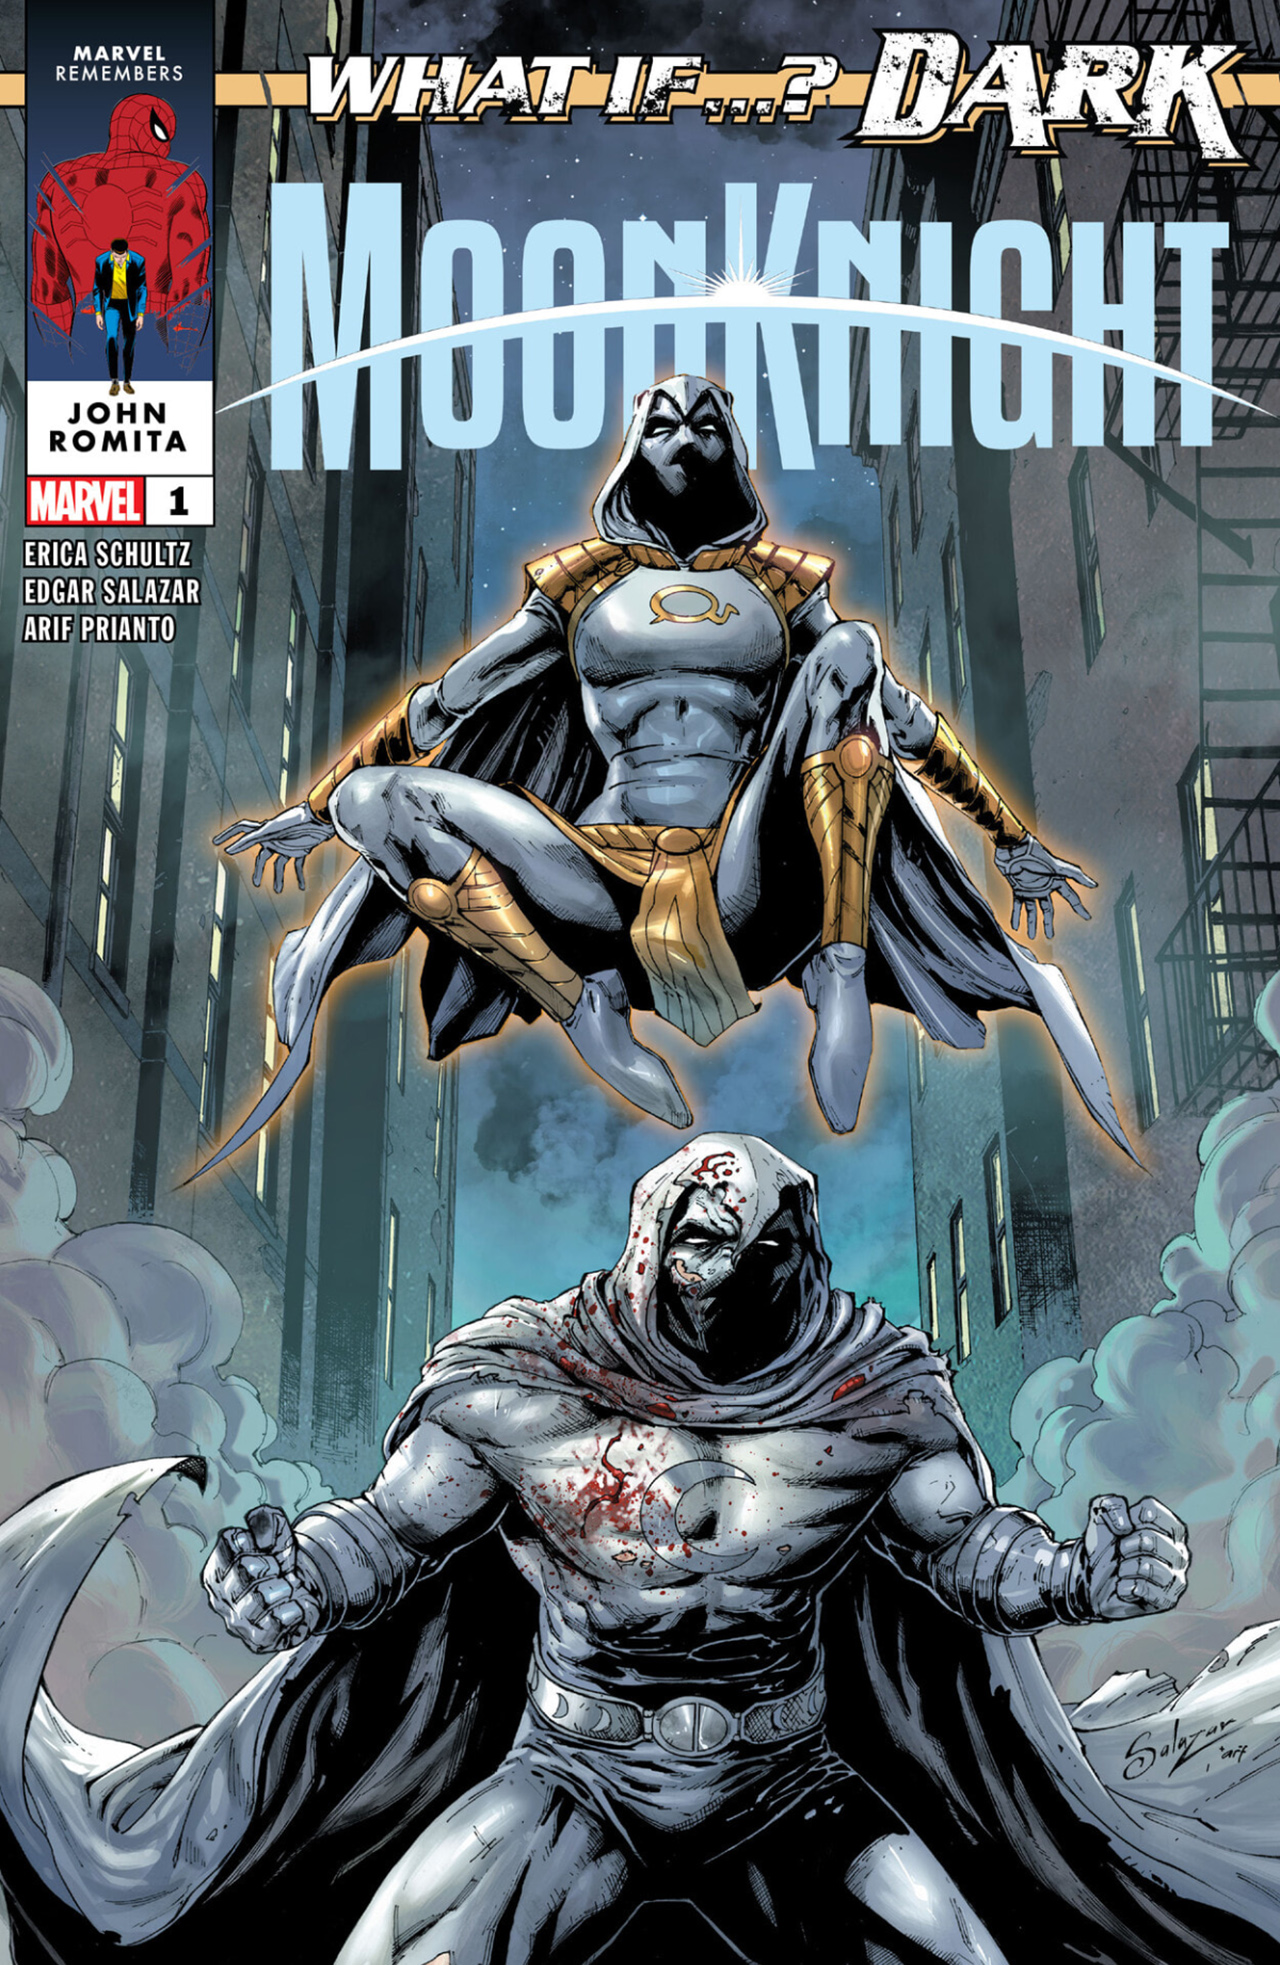 Read online What If…? Dark: Moon Knight comic -  Issue #1 - 1